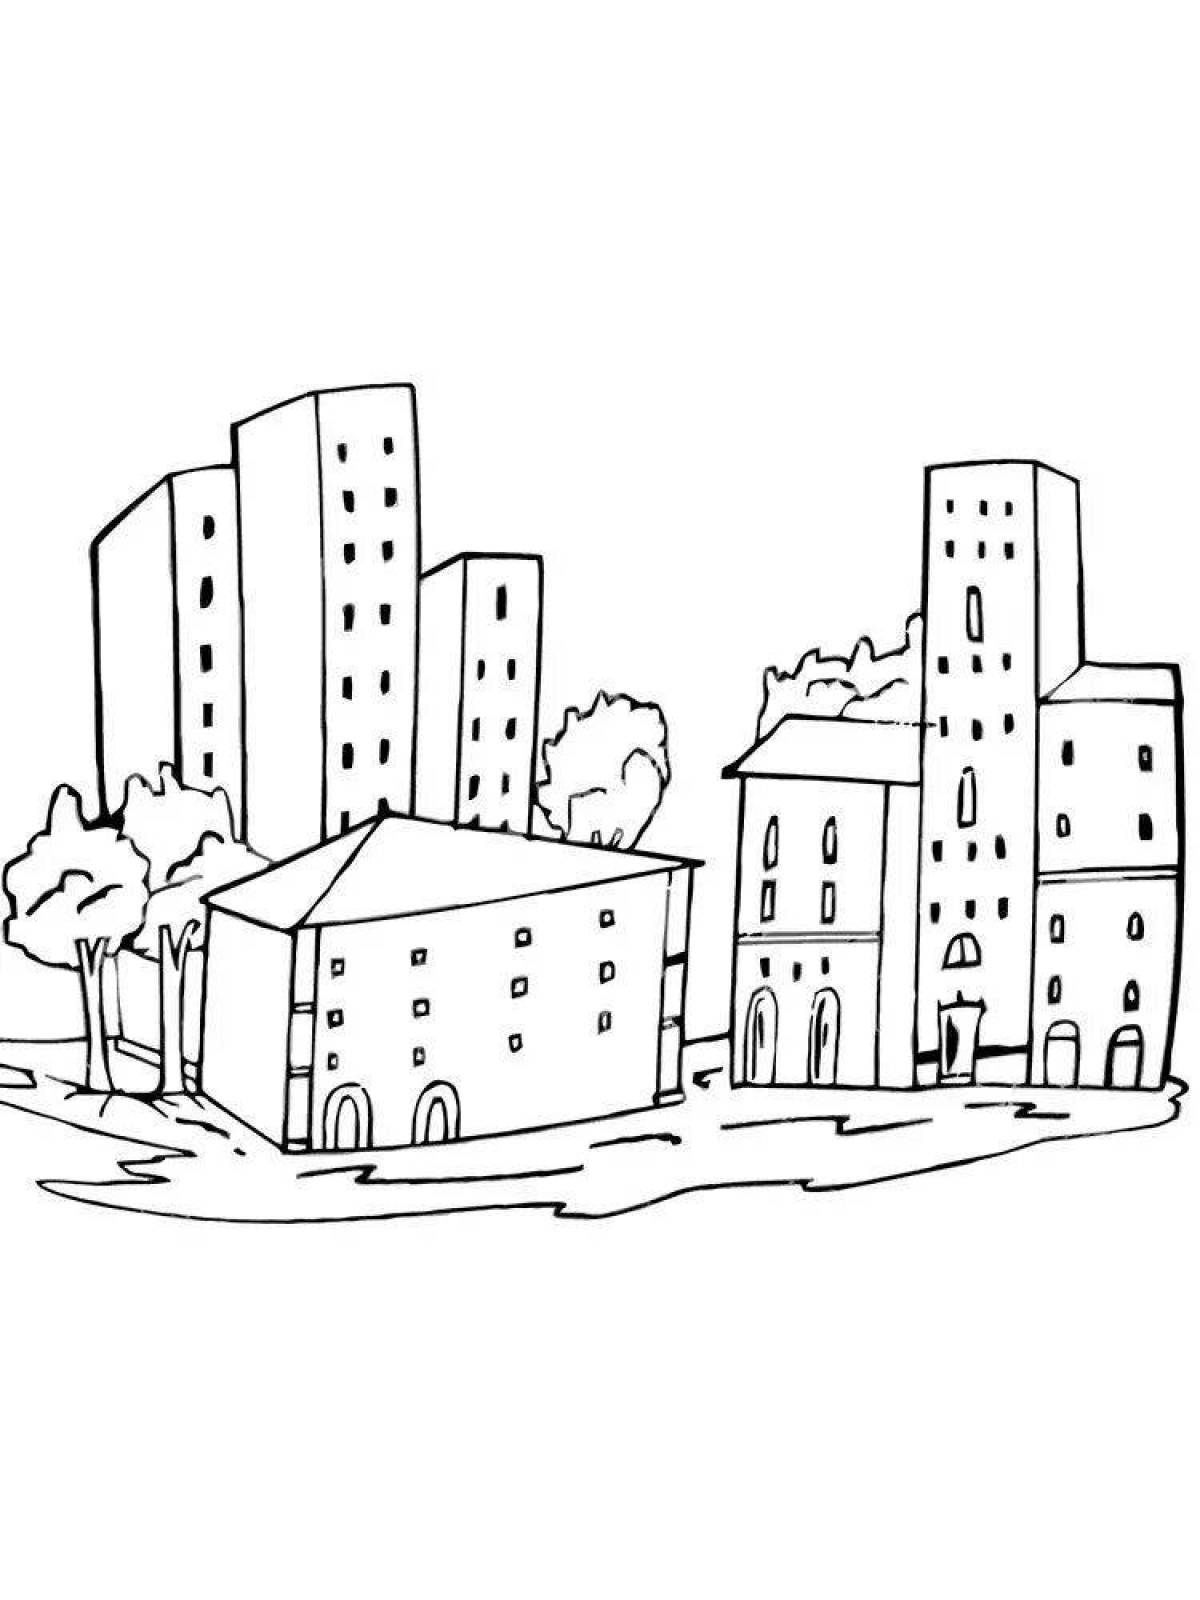 Colored street coloring page